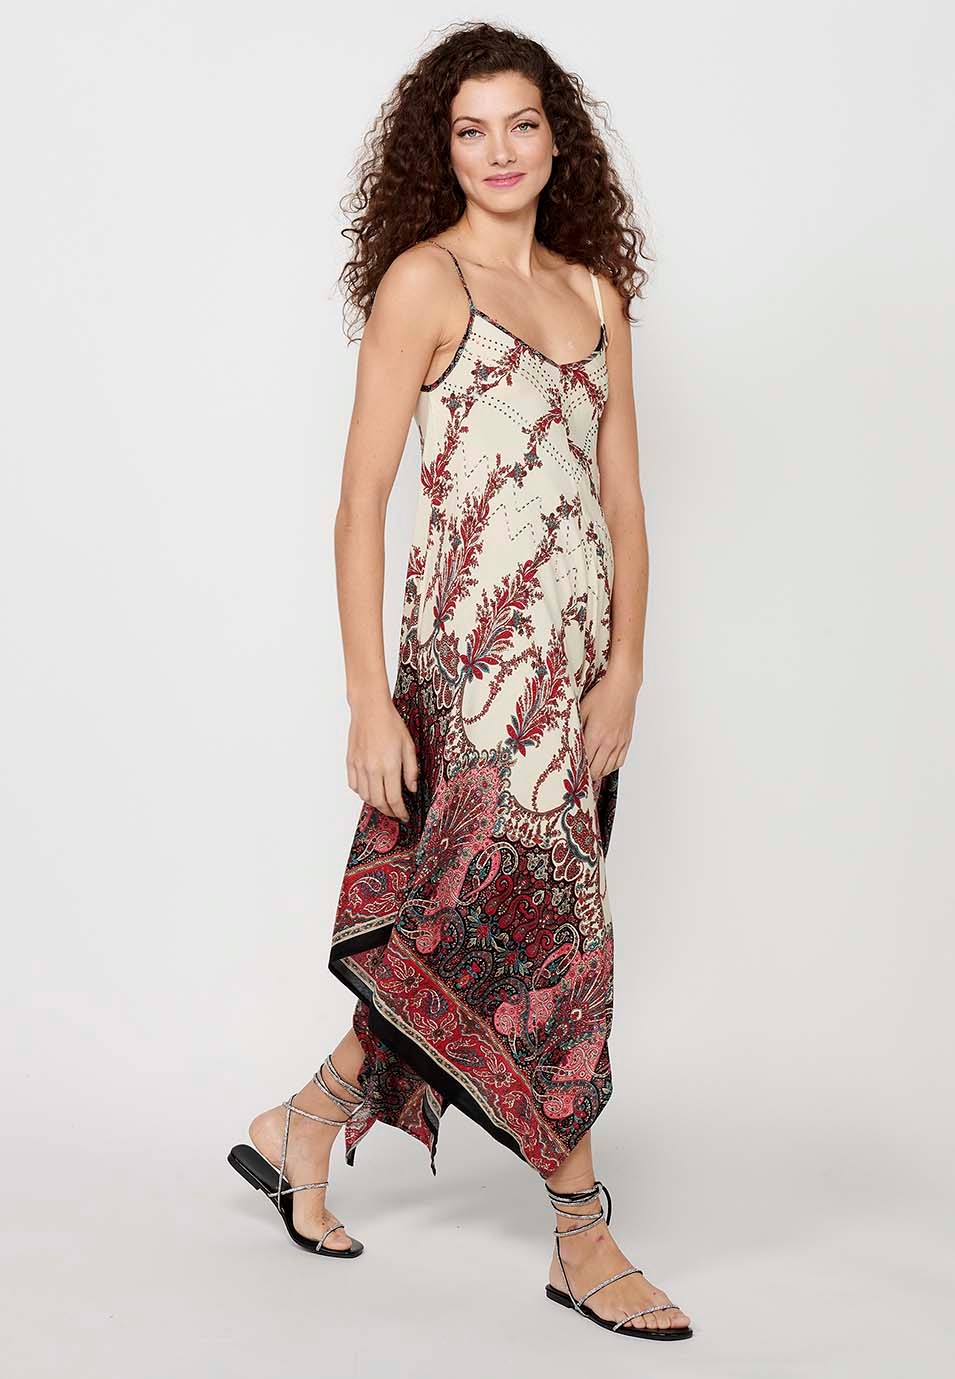 Strap Dress with V-neckline and Floral Print in Ecru for Women 4